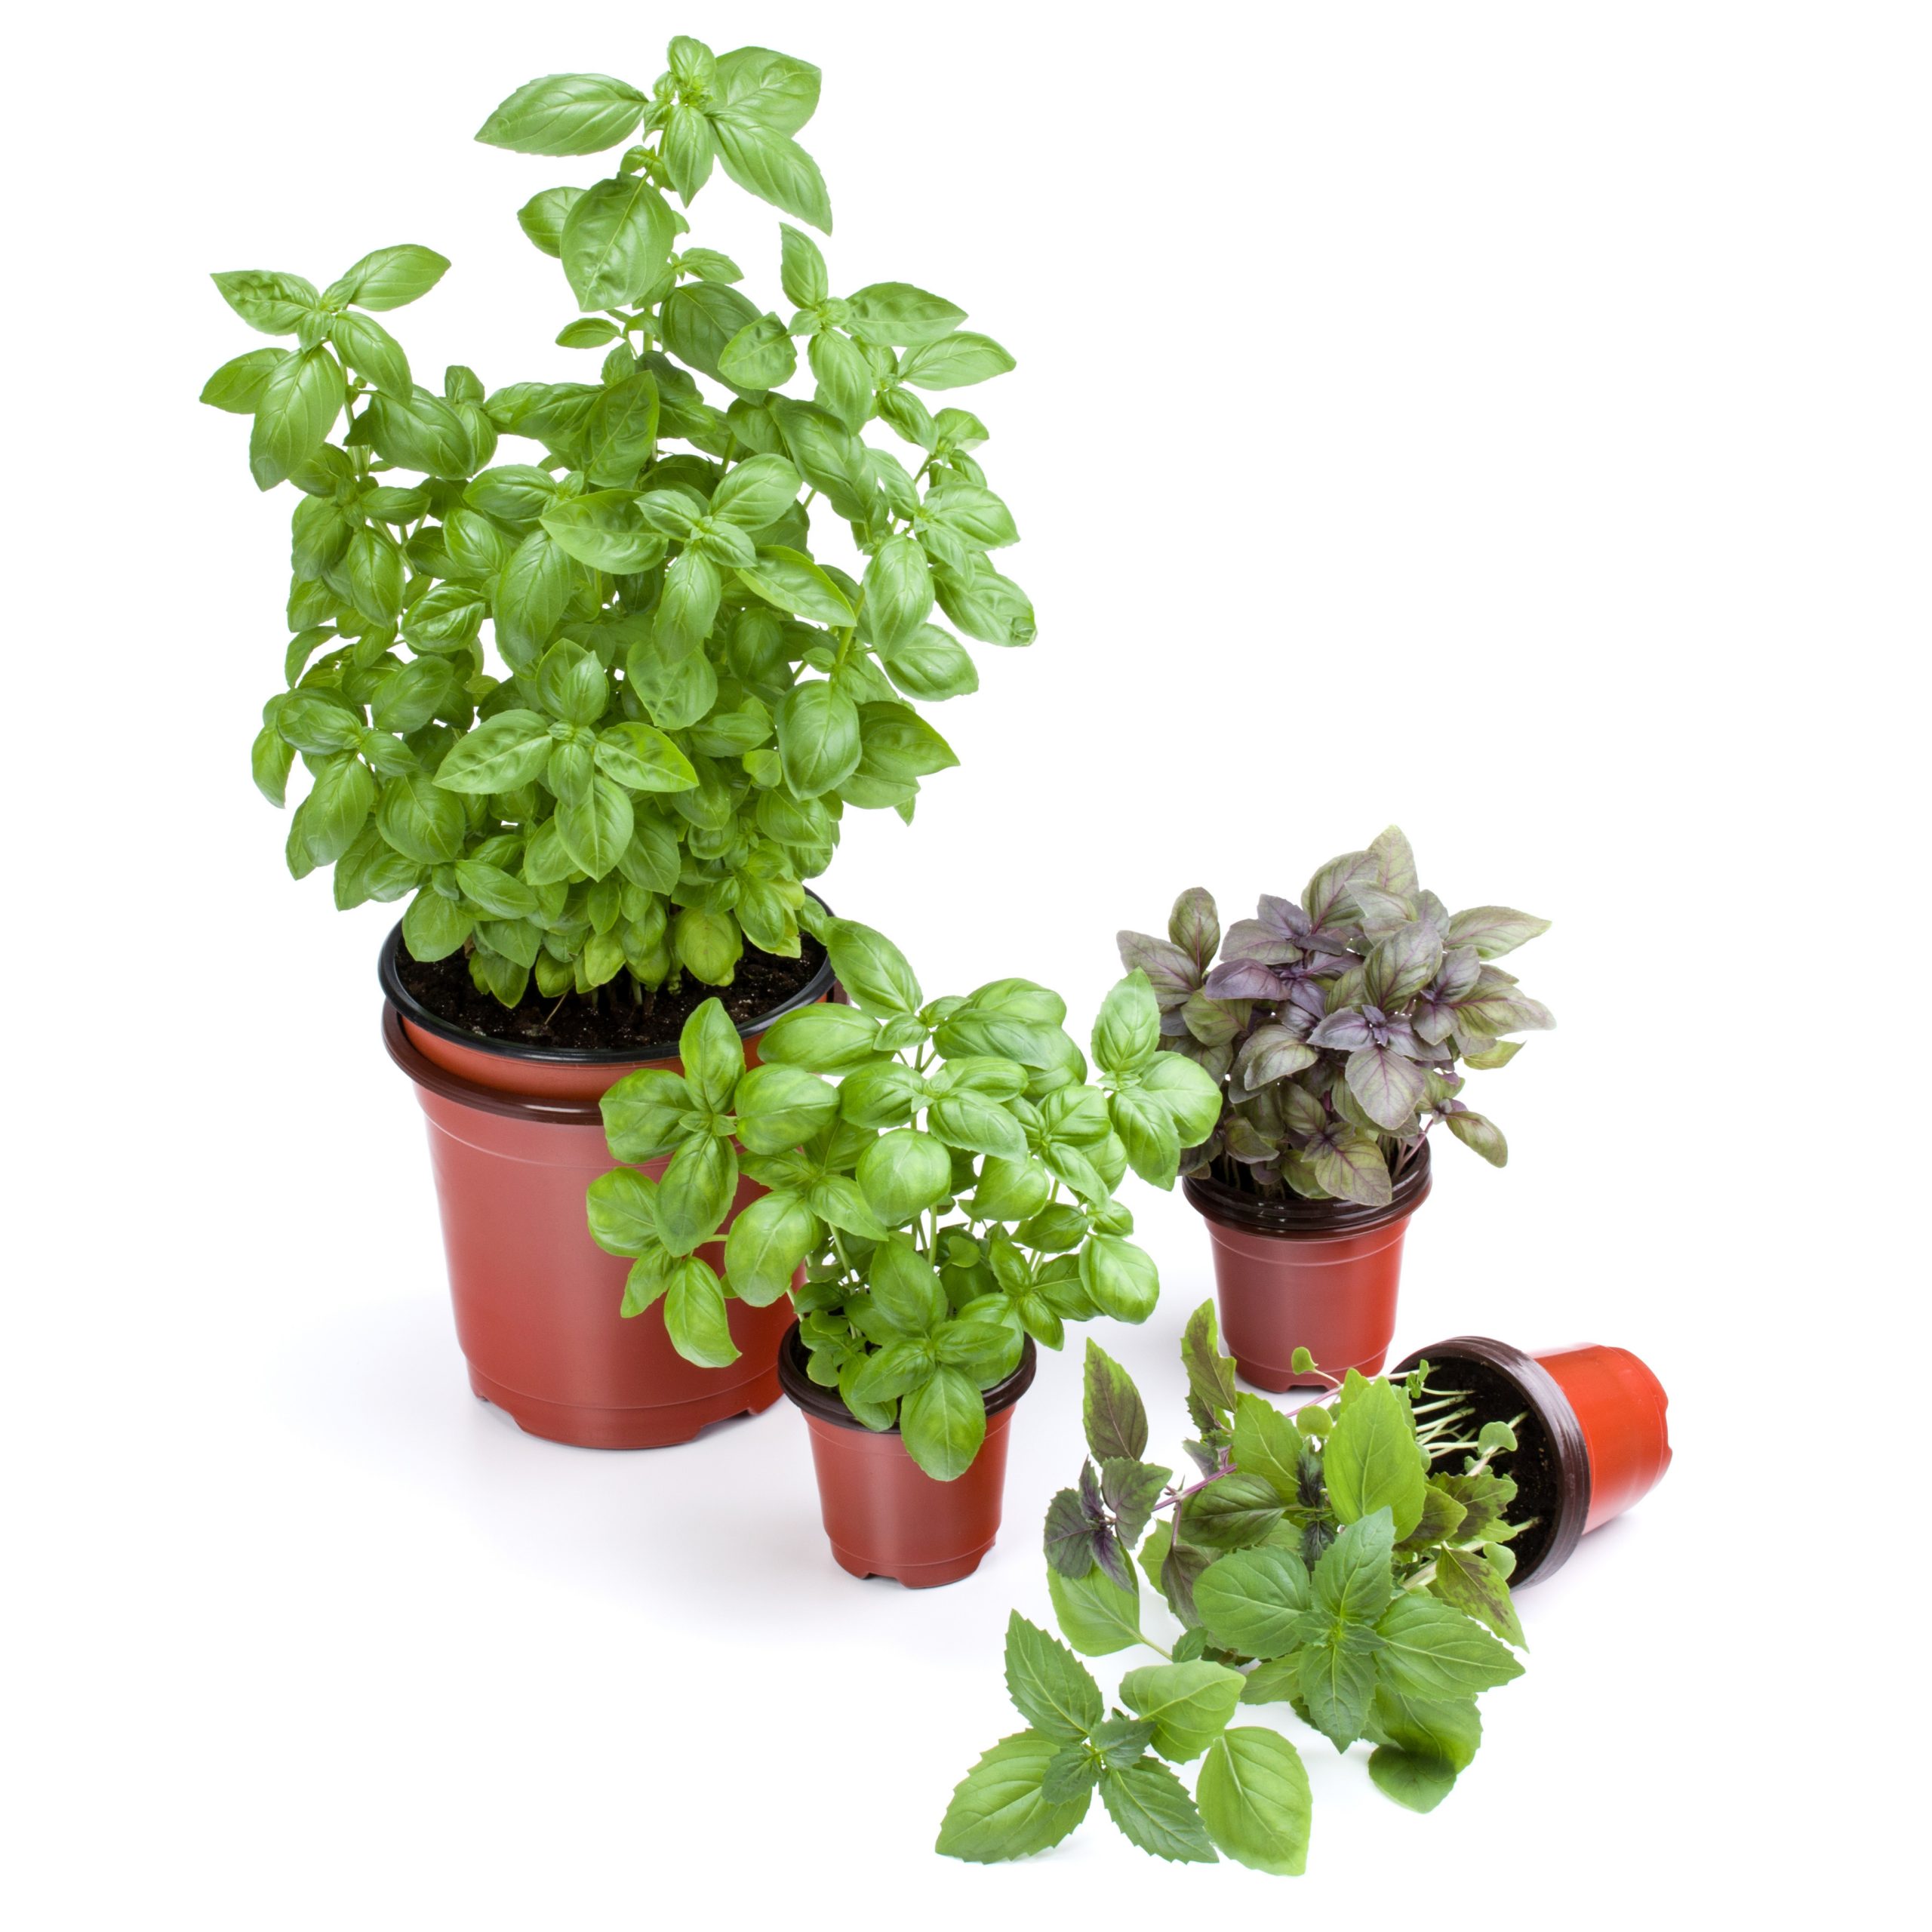 Know when to move your plants indoors, basil, herbs